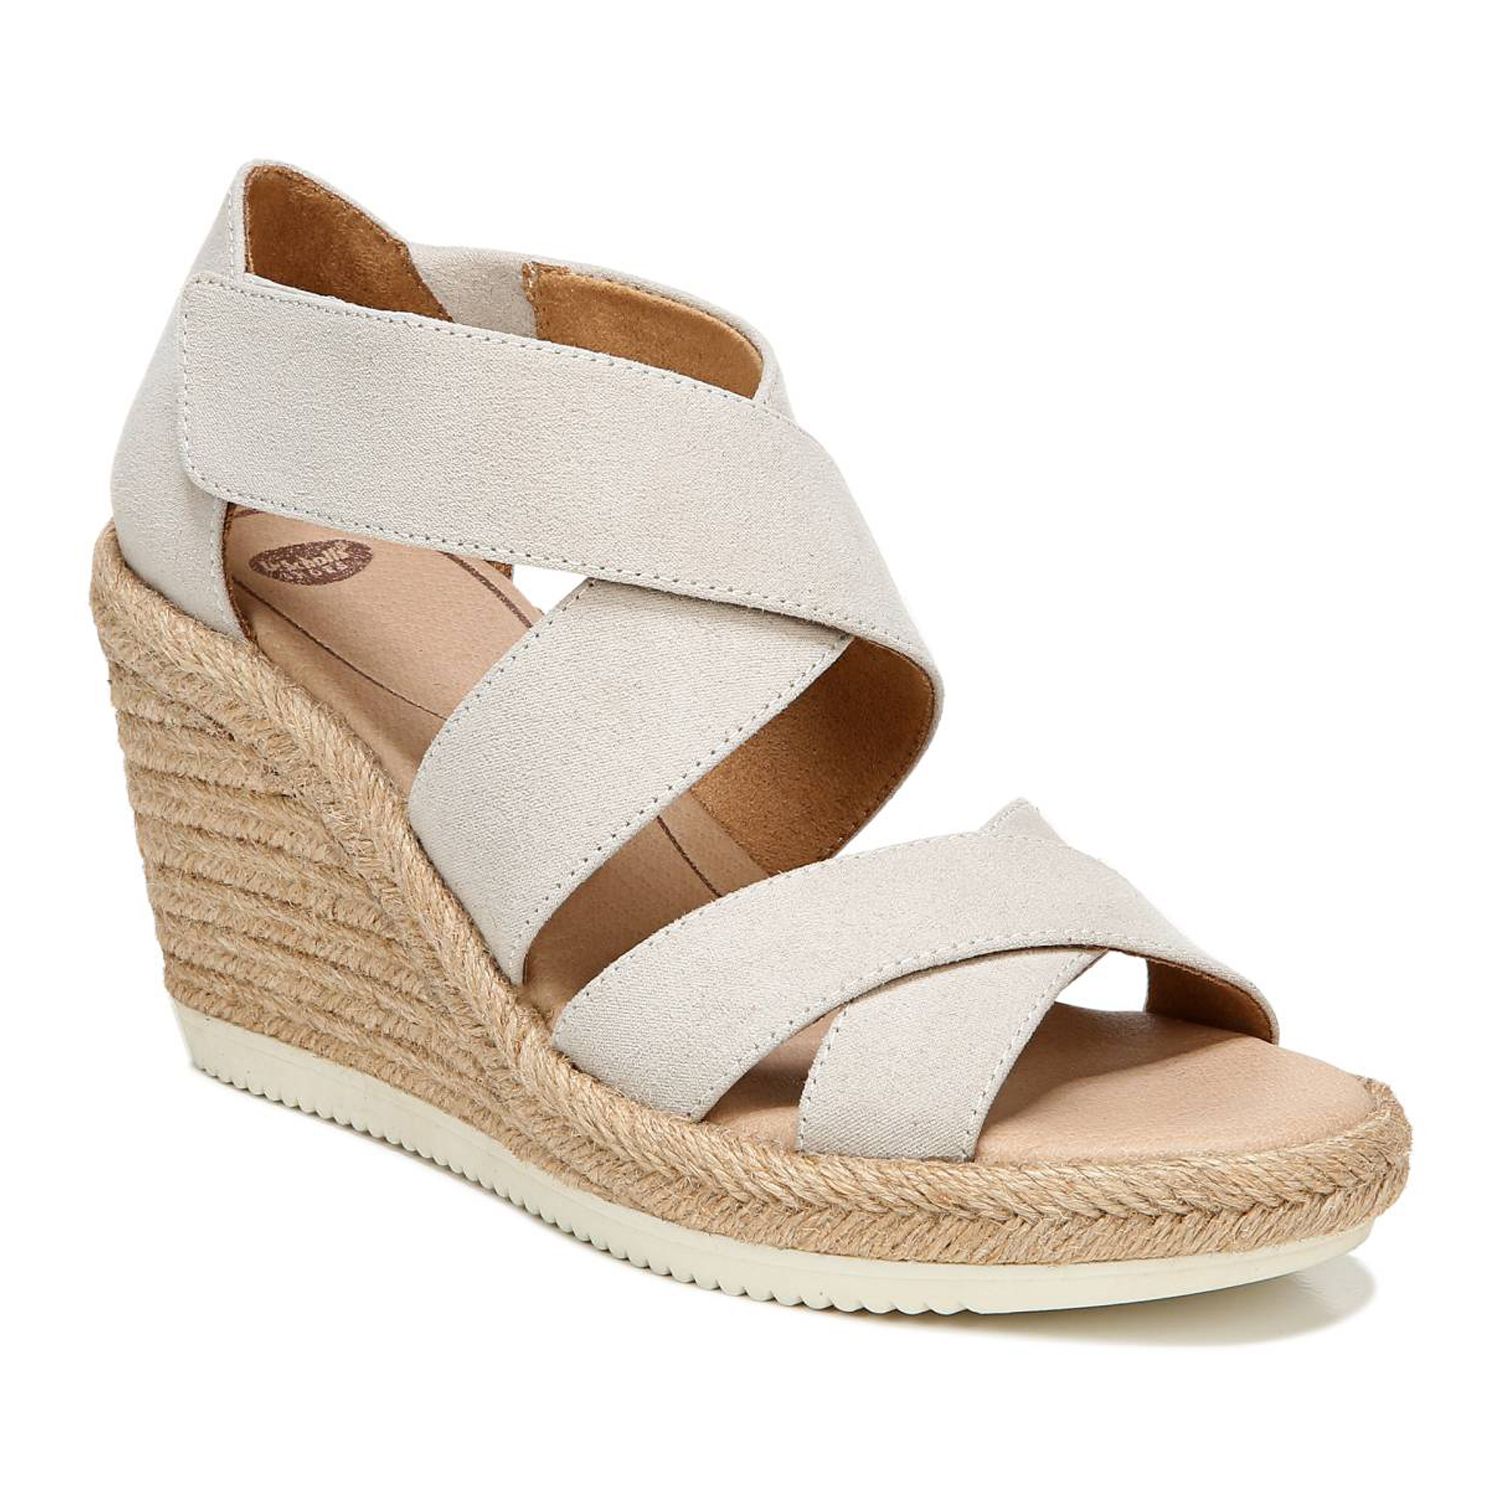 Image for Dr. Scholl's Visitor Women's Wedge Sandals at Kohl's.